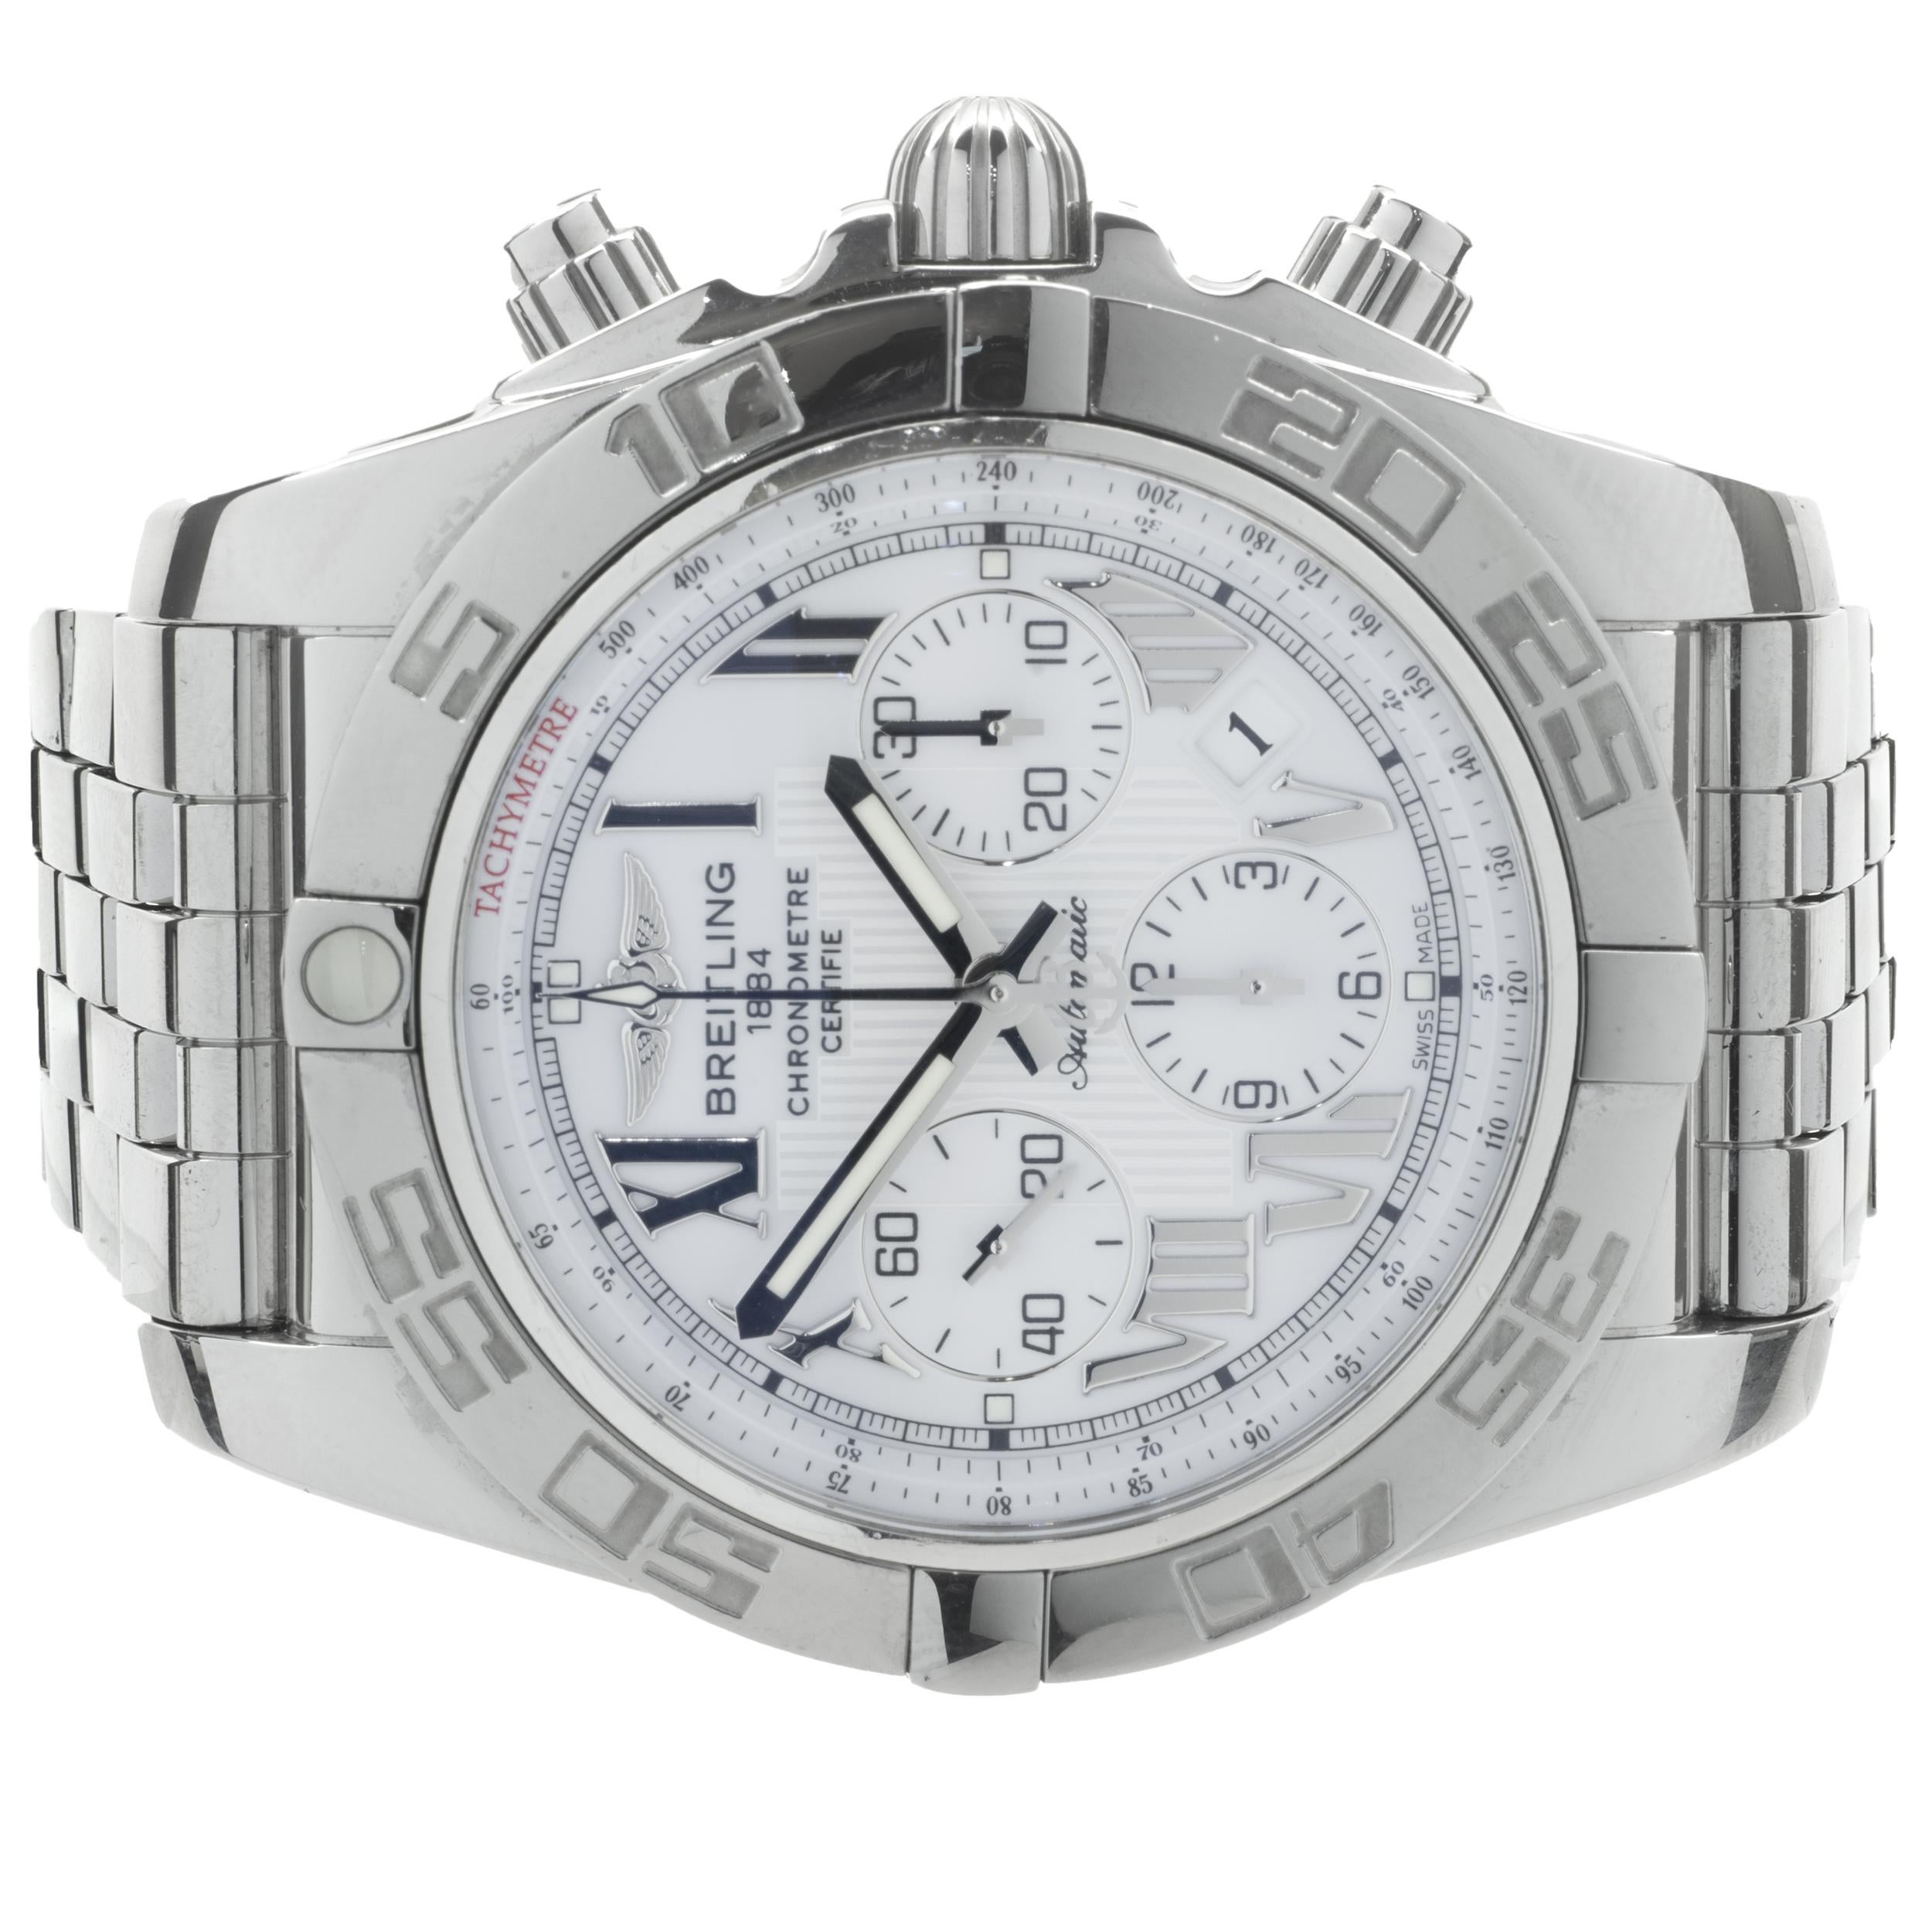 Movement: automatic
Function: uni-rotational bezel, date, seconds, chronograph
Case: round 44mm stainless steel case, sapphire protective crystal, Breitling engraved case-back, screw-down crown, water resistant to 100 meters
Band: Breitling